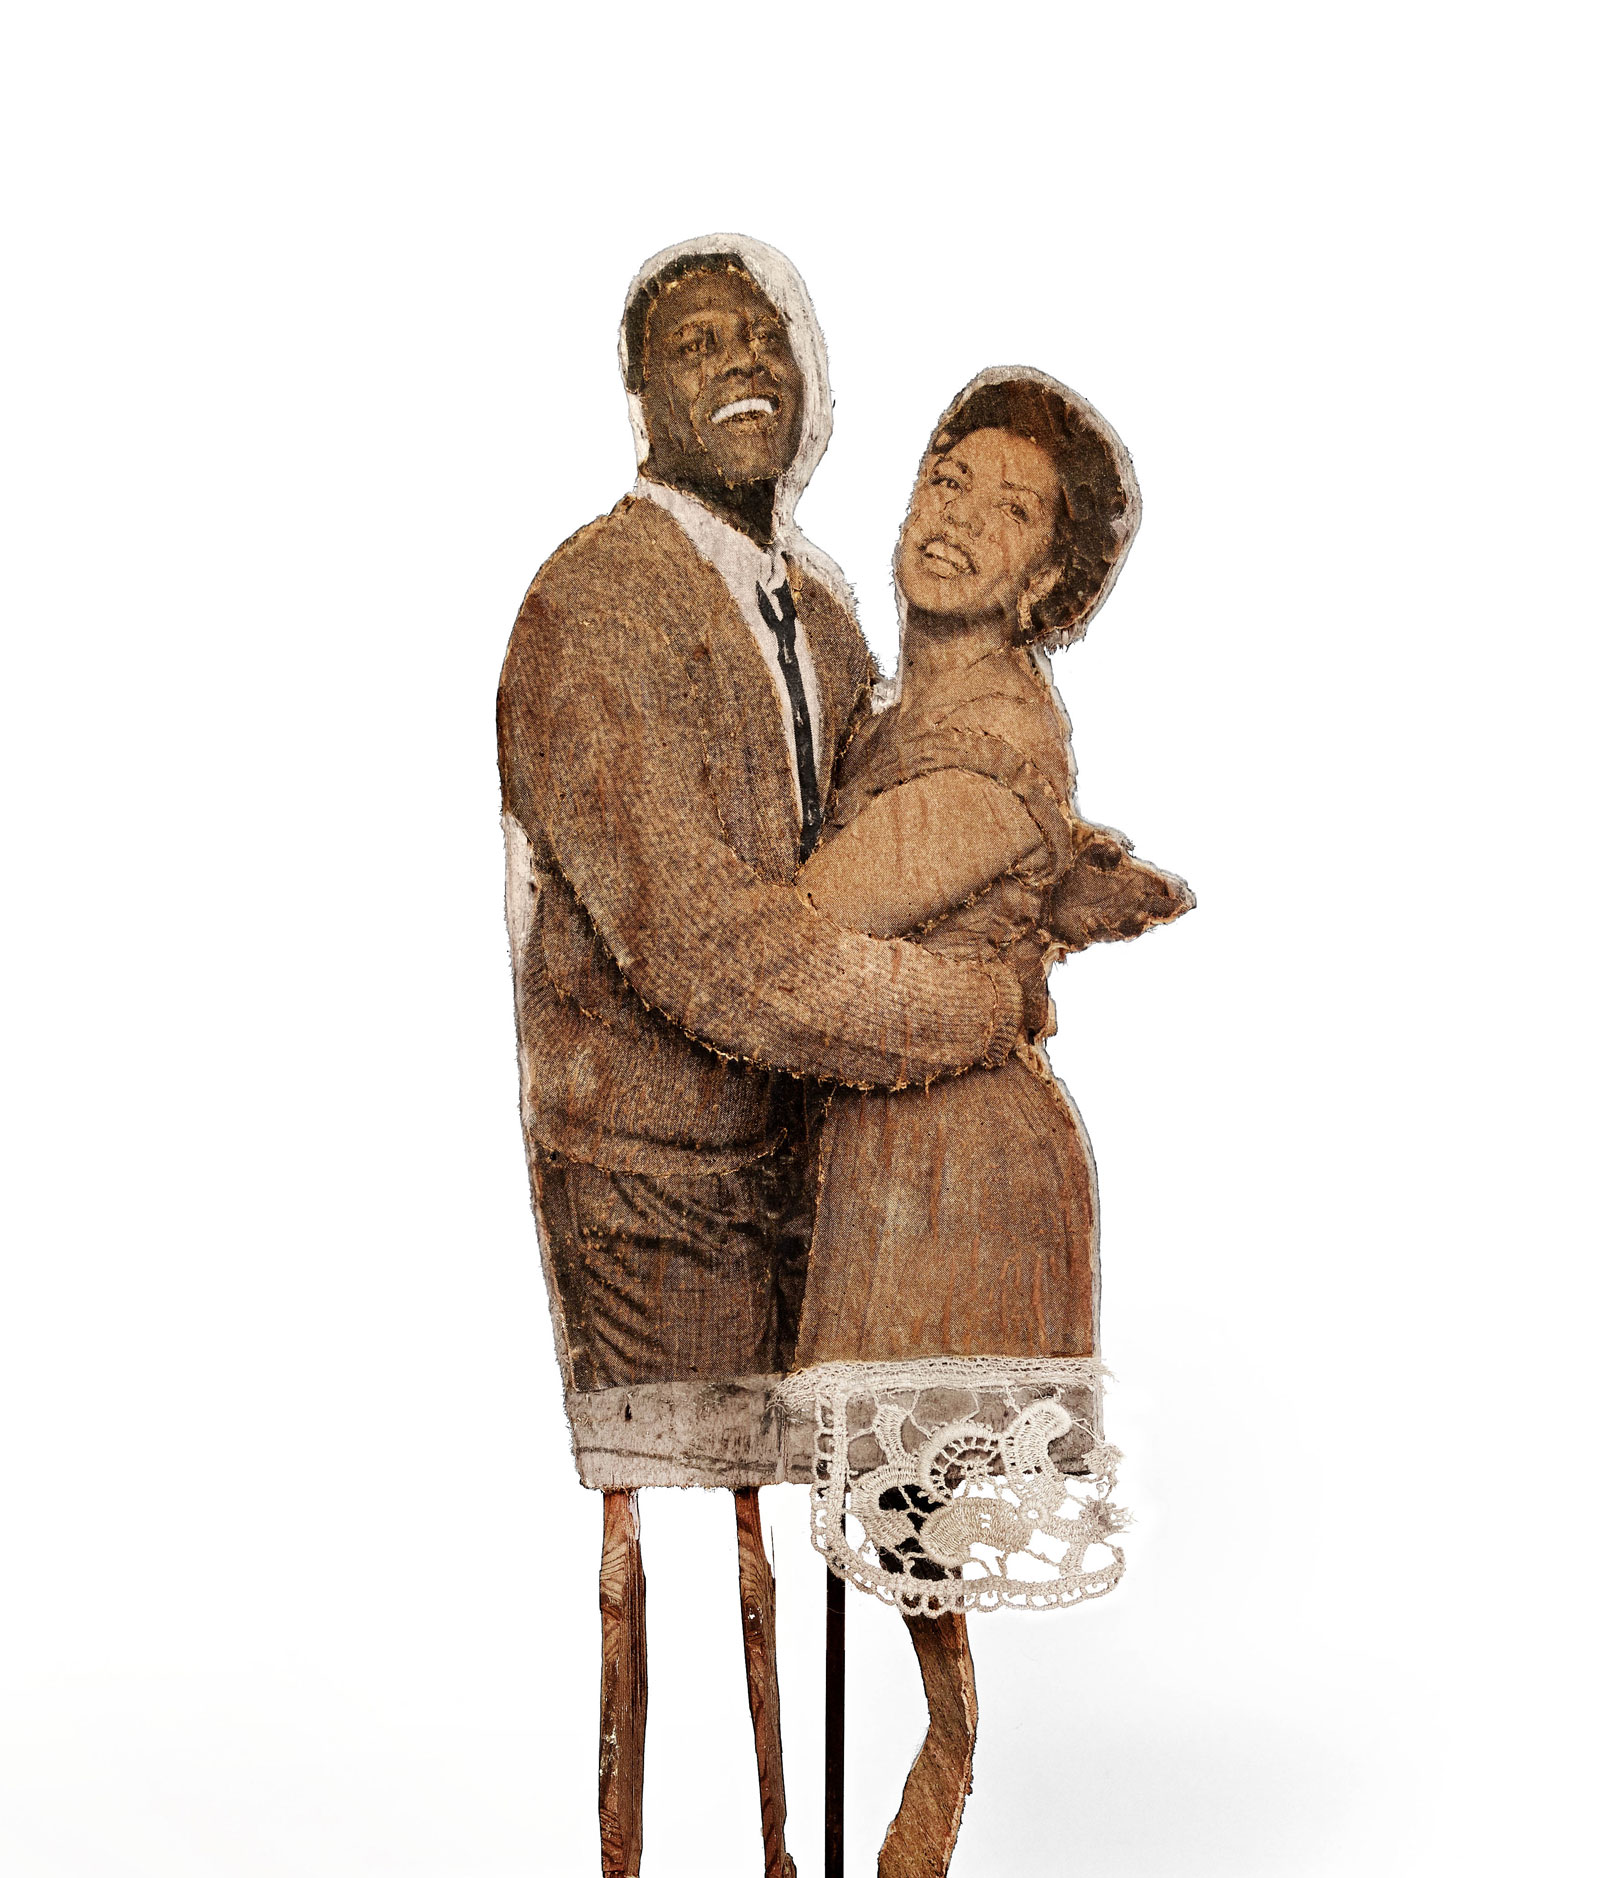 cut out figures of an African American couple holding each other and laughing, their legs sticks